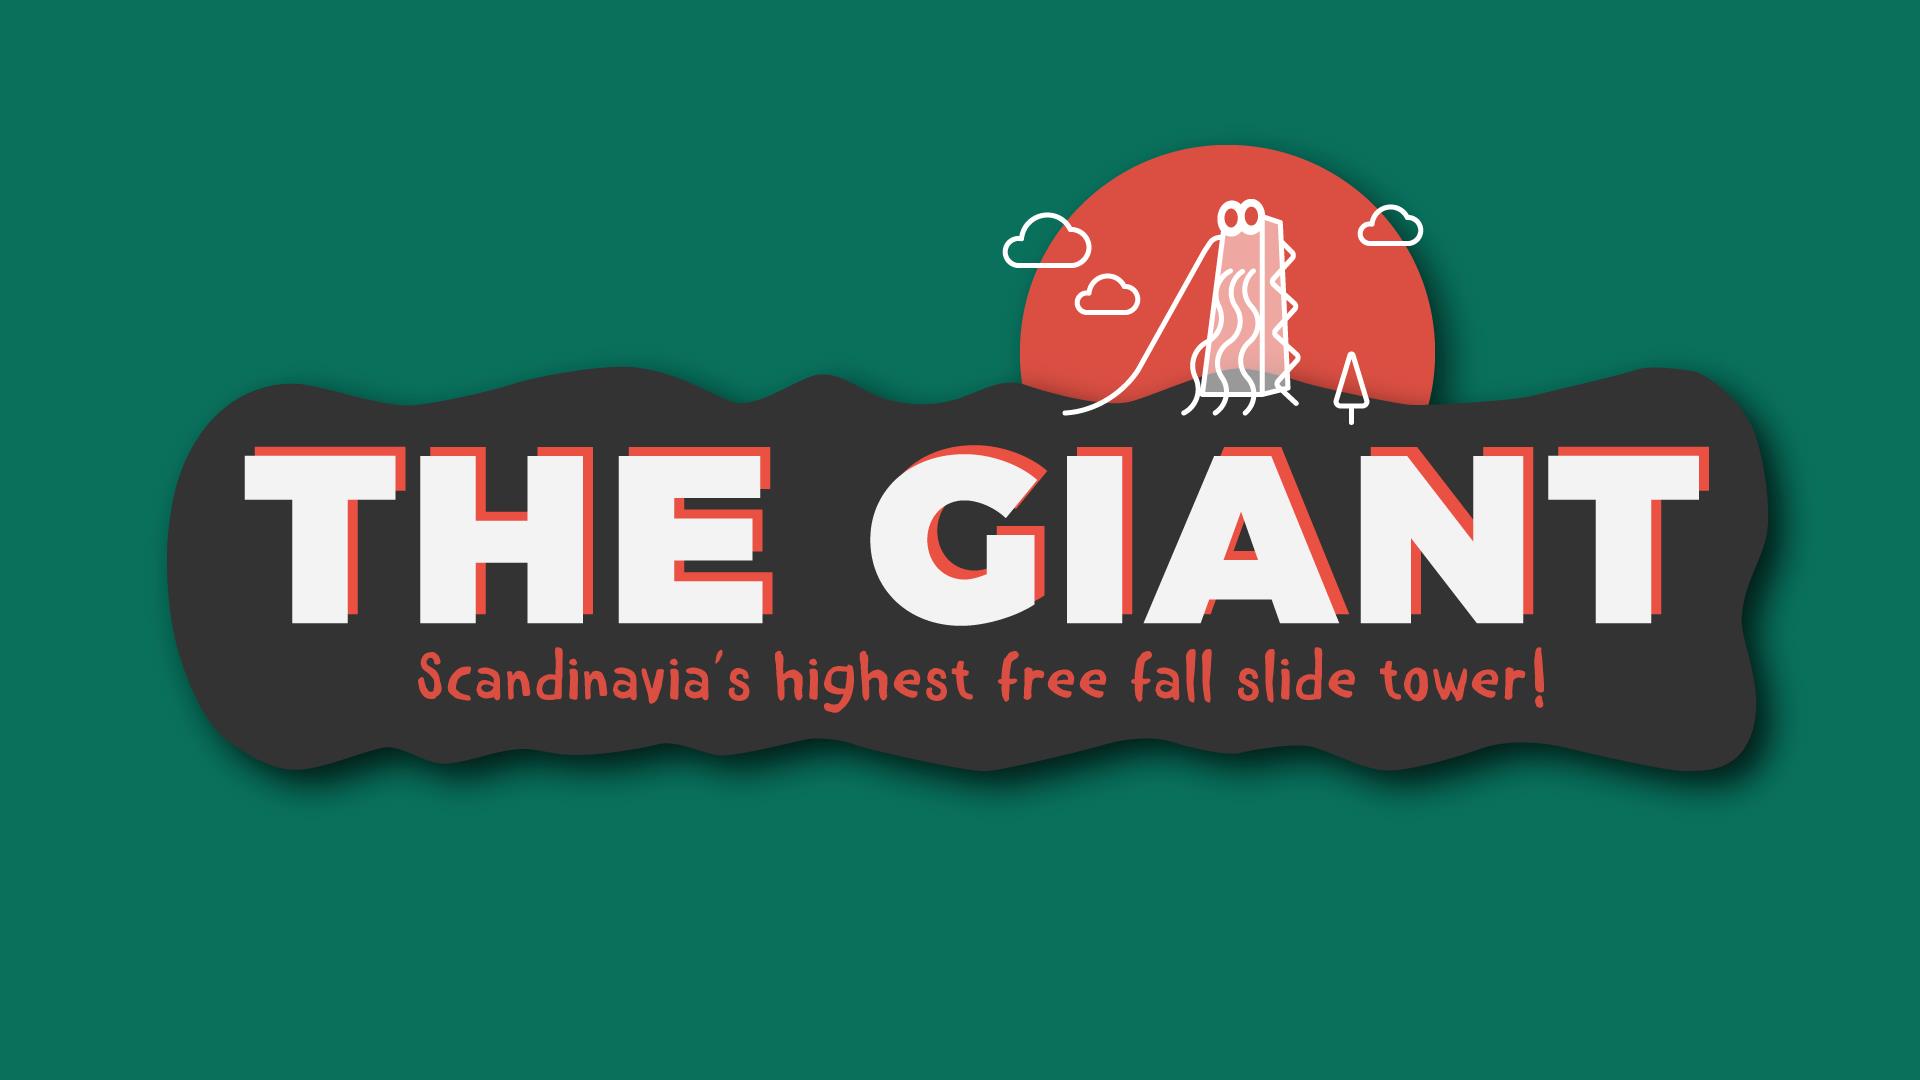 Try the GIANT in WOW PARK Billund